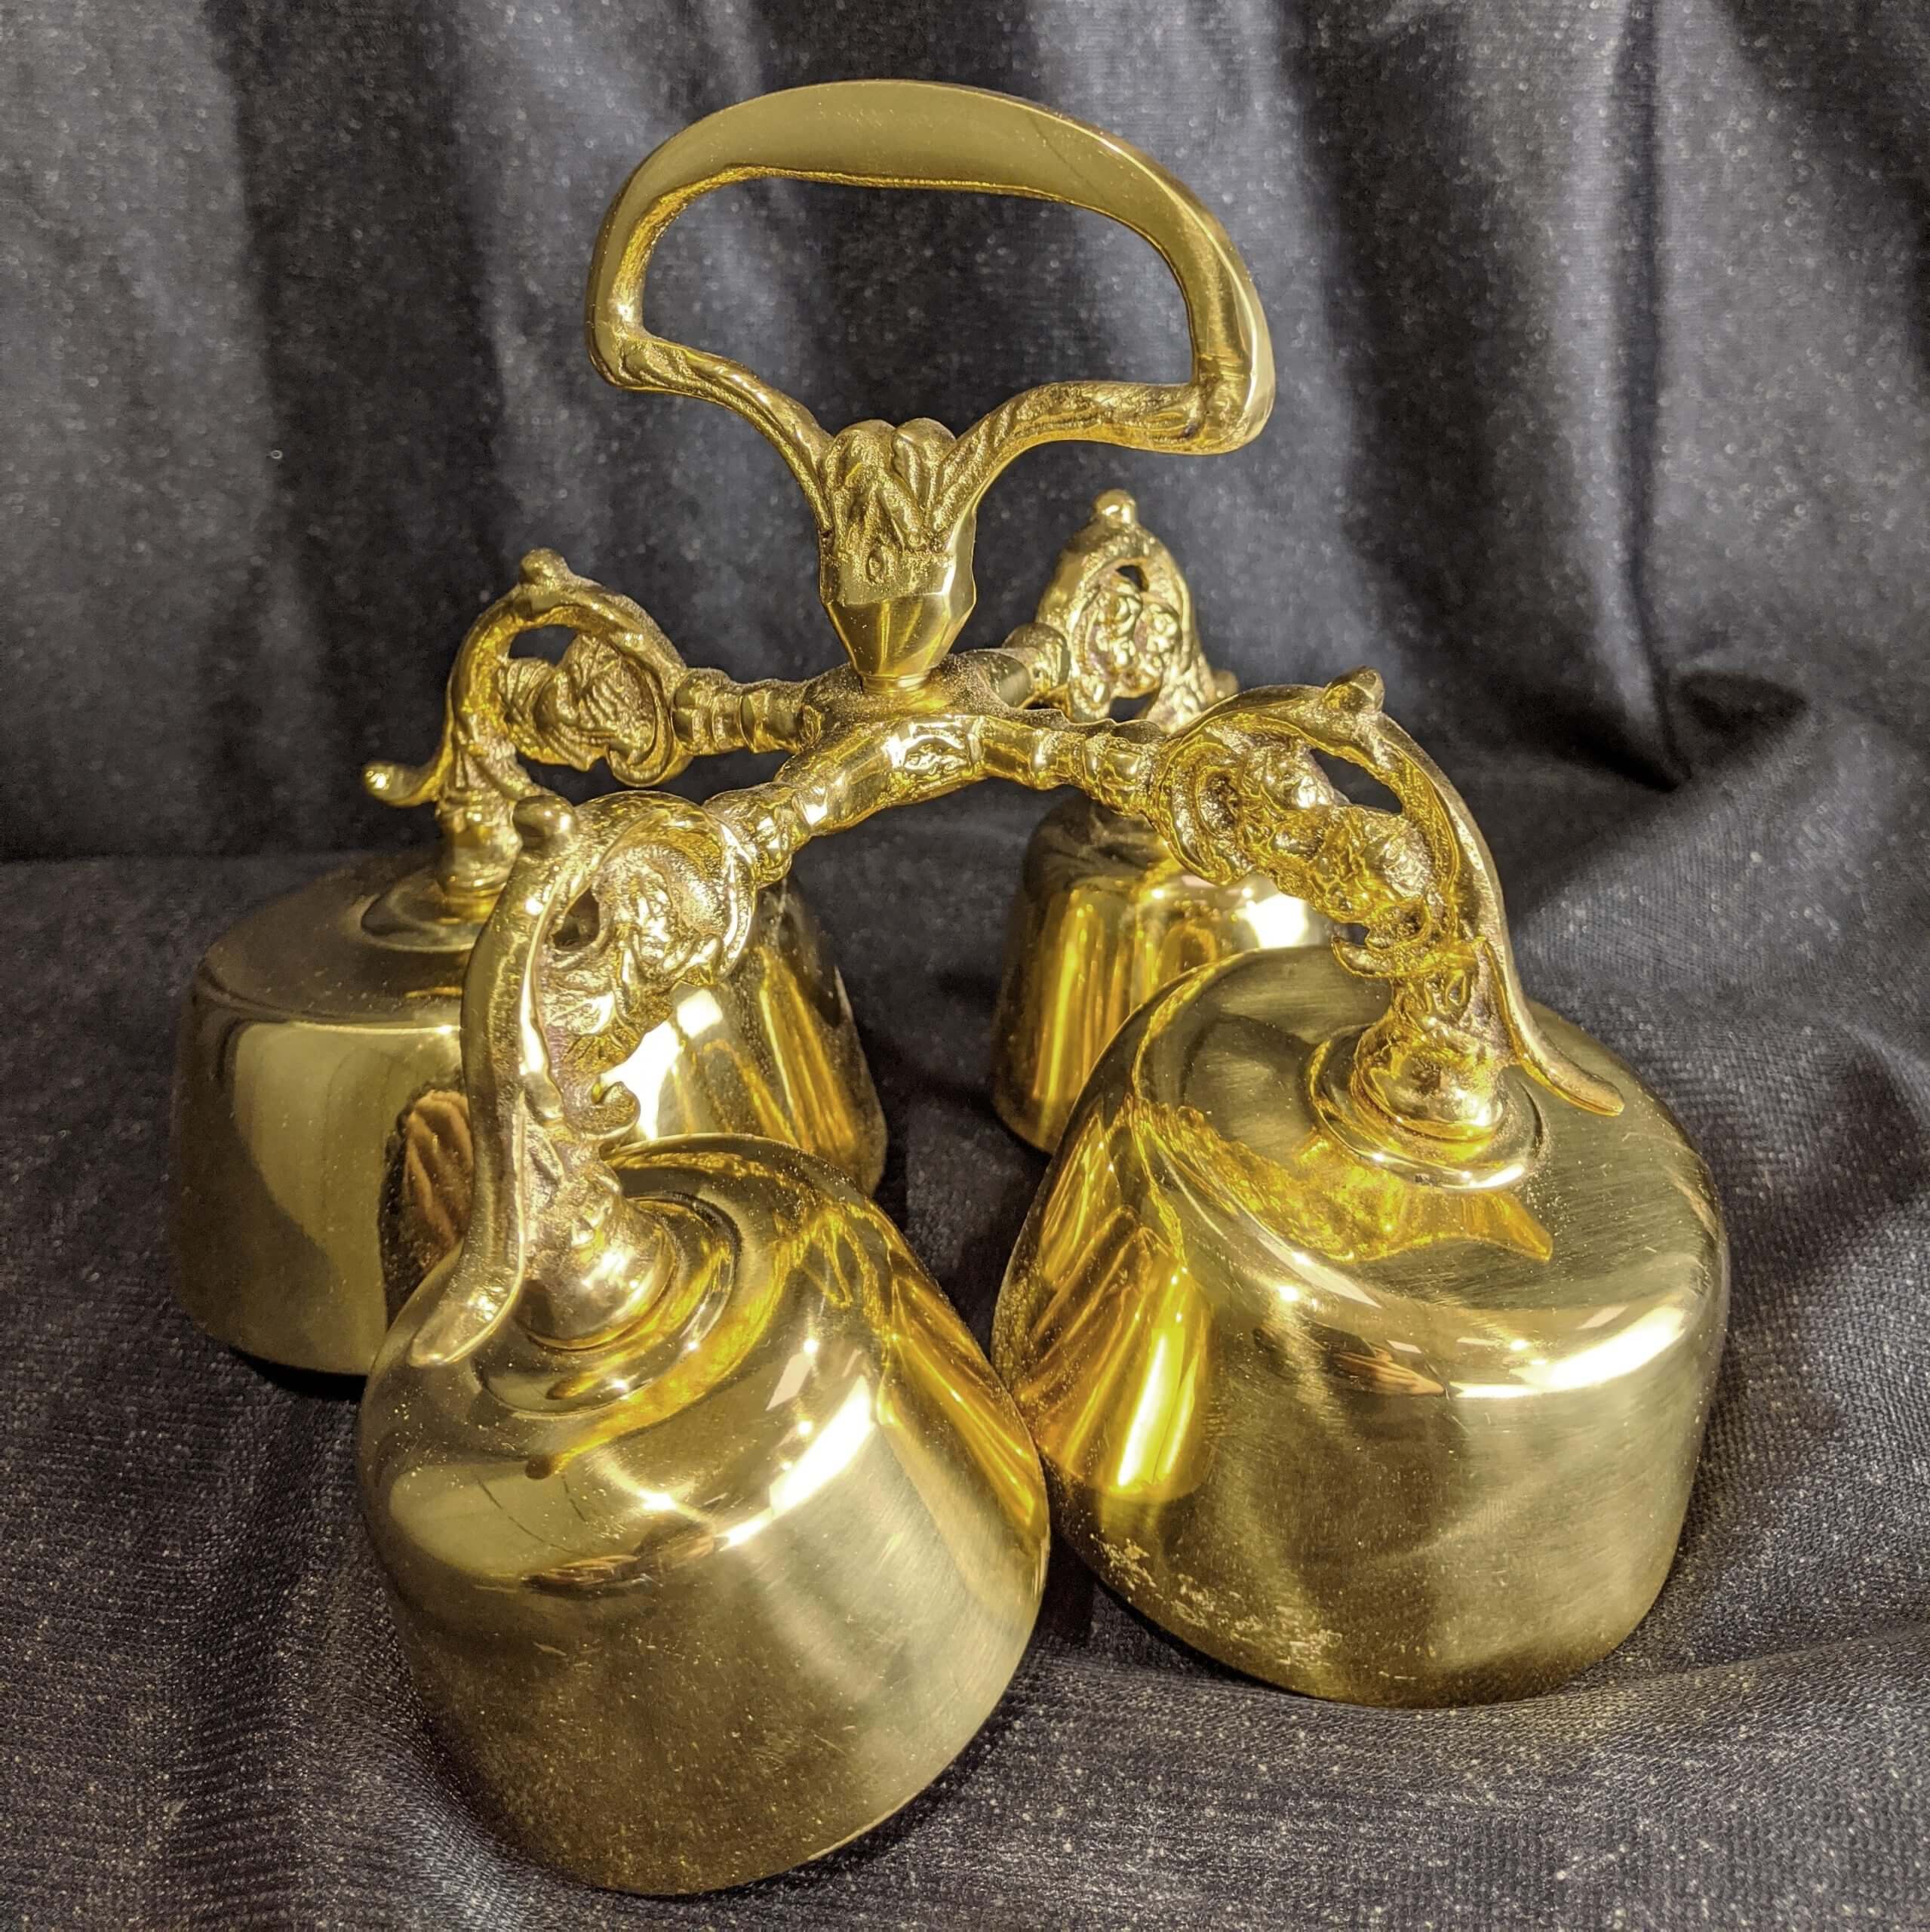 Set of Four Solid Brass Sanctus Altar Liturgical Bells in Rococo/Baroque  Style - Antique Church Furnishings